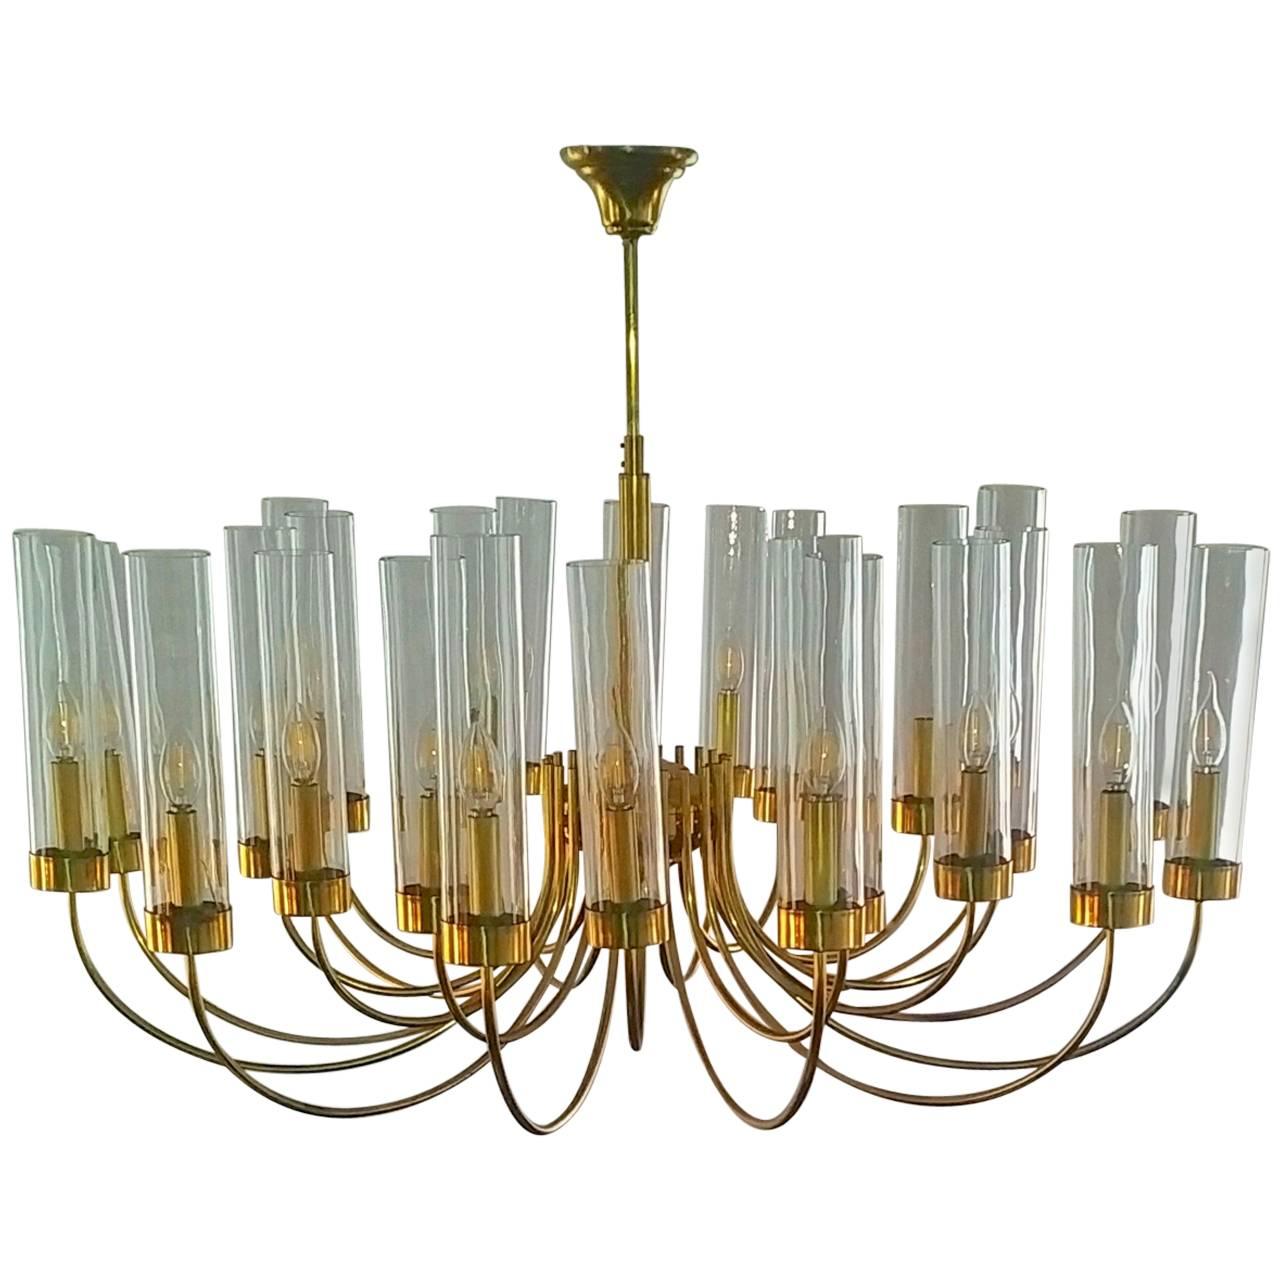 Spectacular 24 Arm Brass and Glass Chandelier For Sale